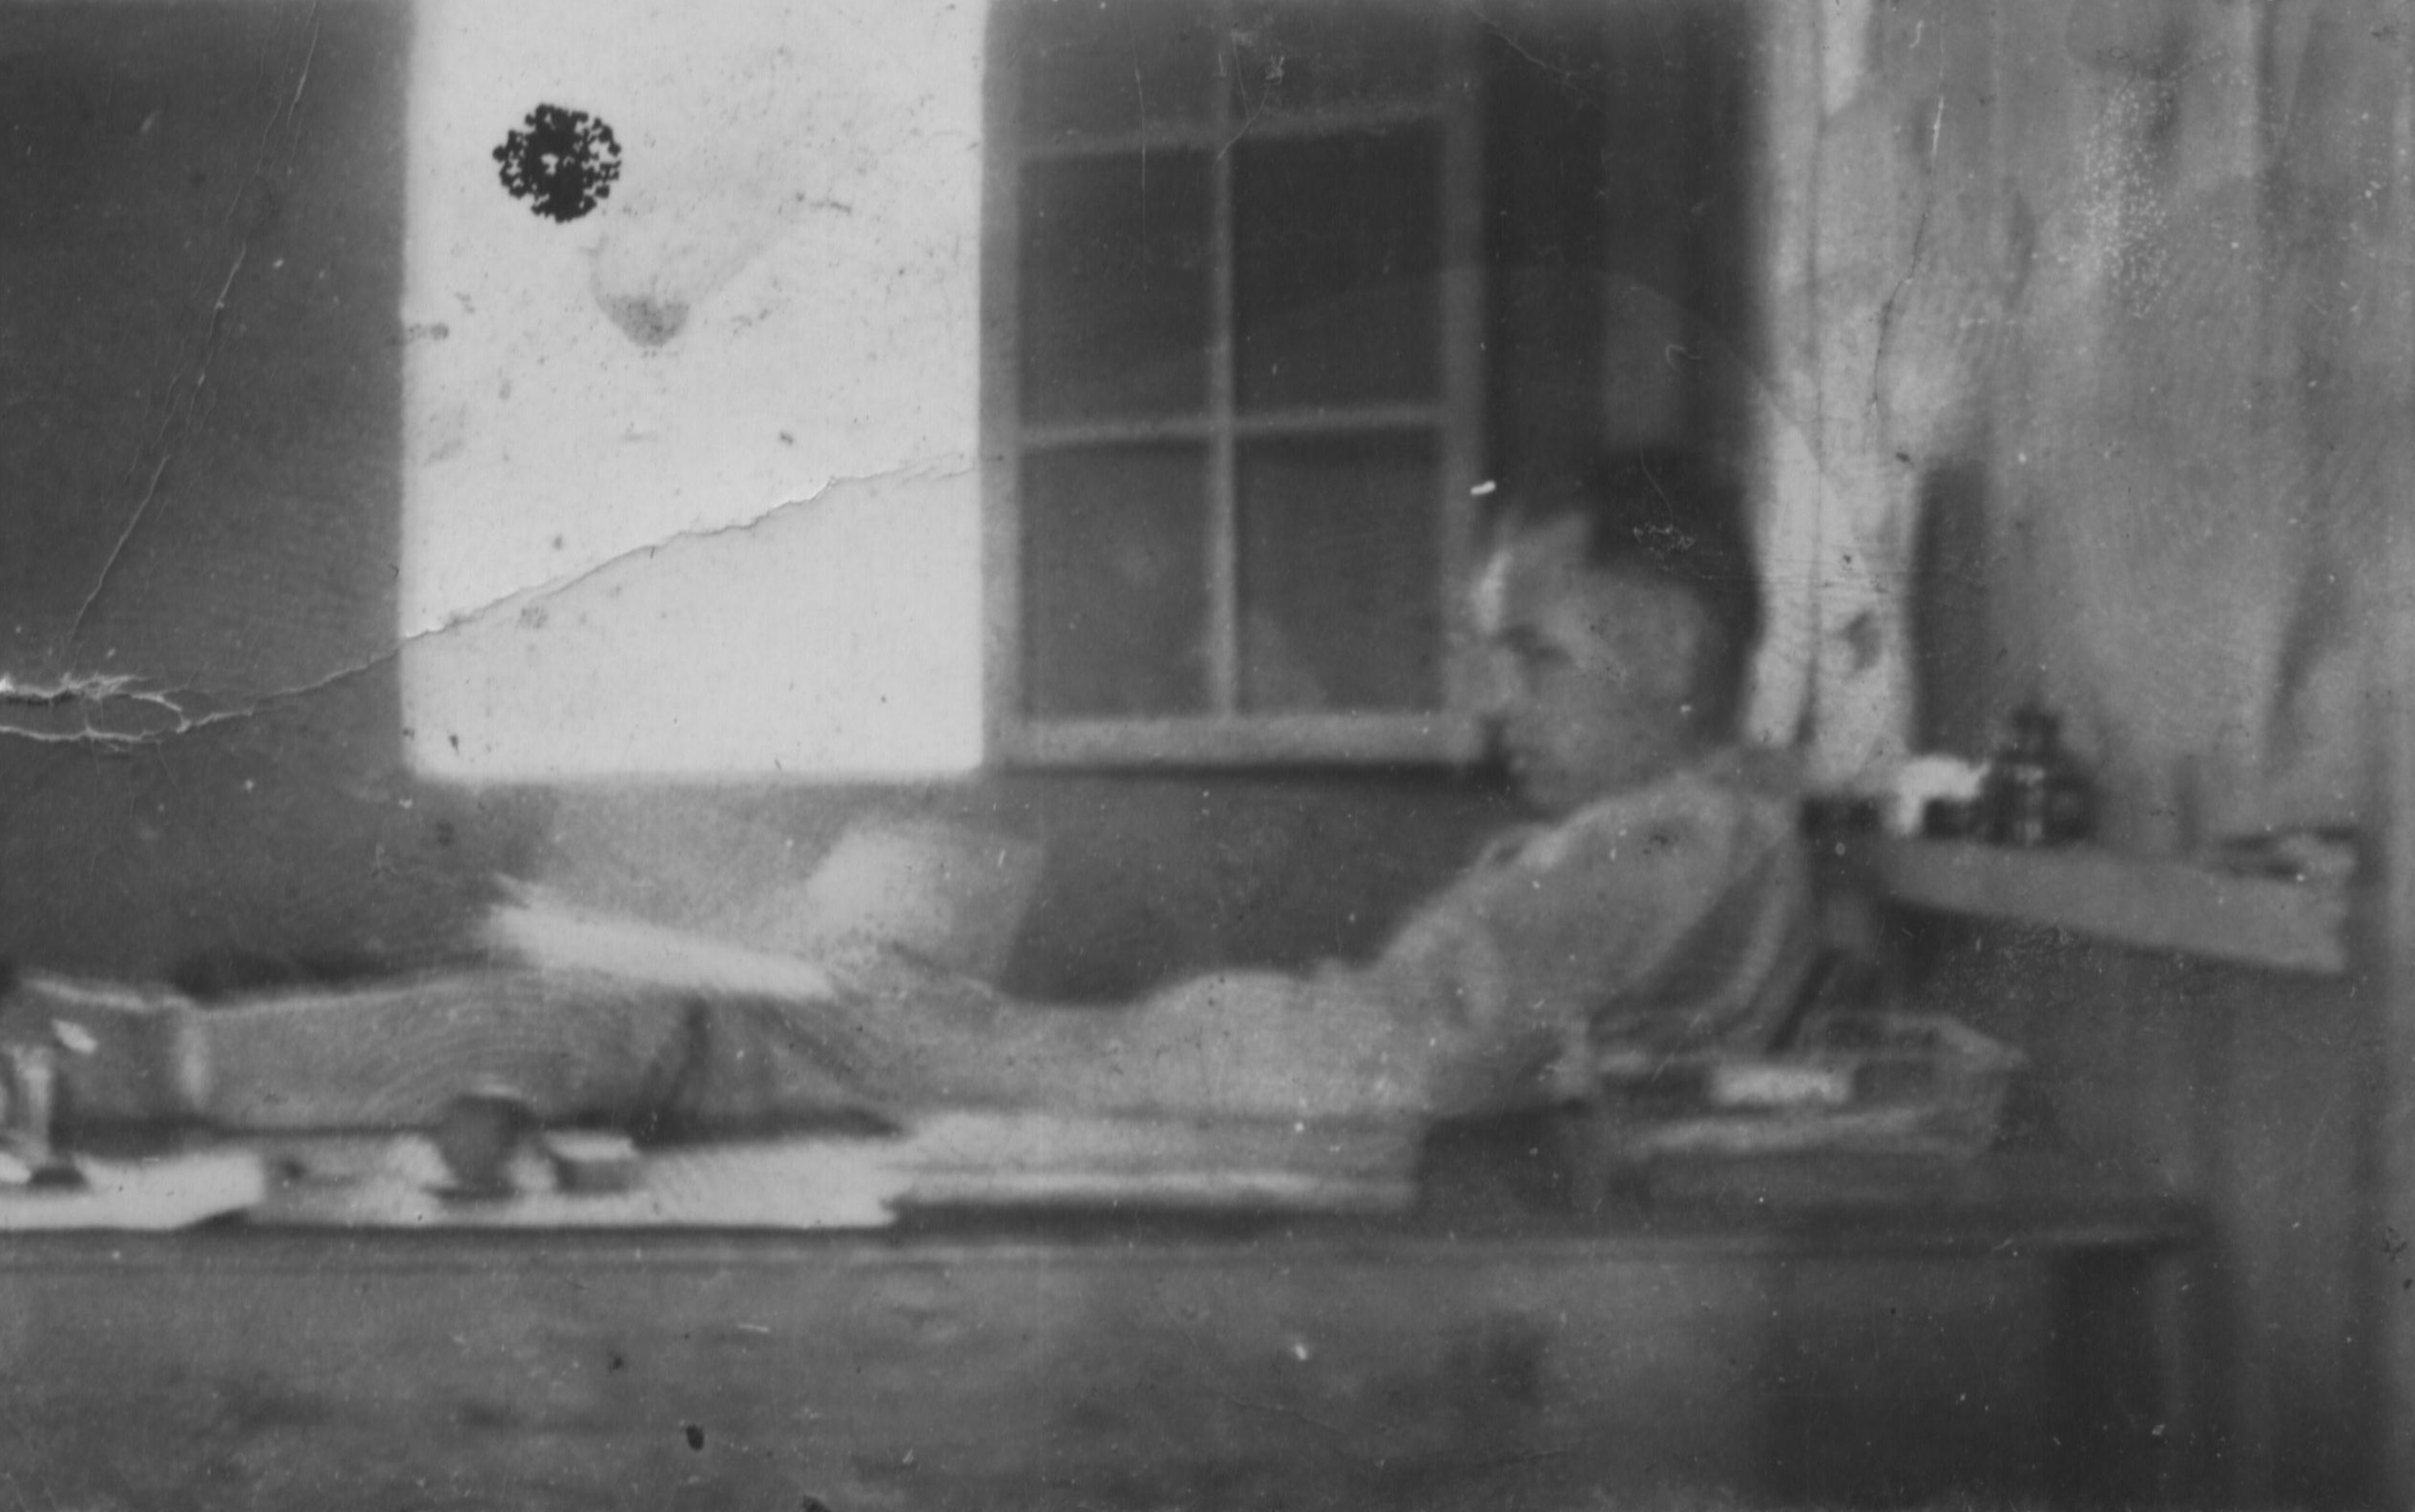 Capt. Shipley in his office at the Leeds CCC Camp